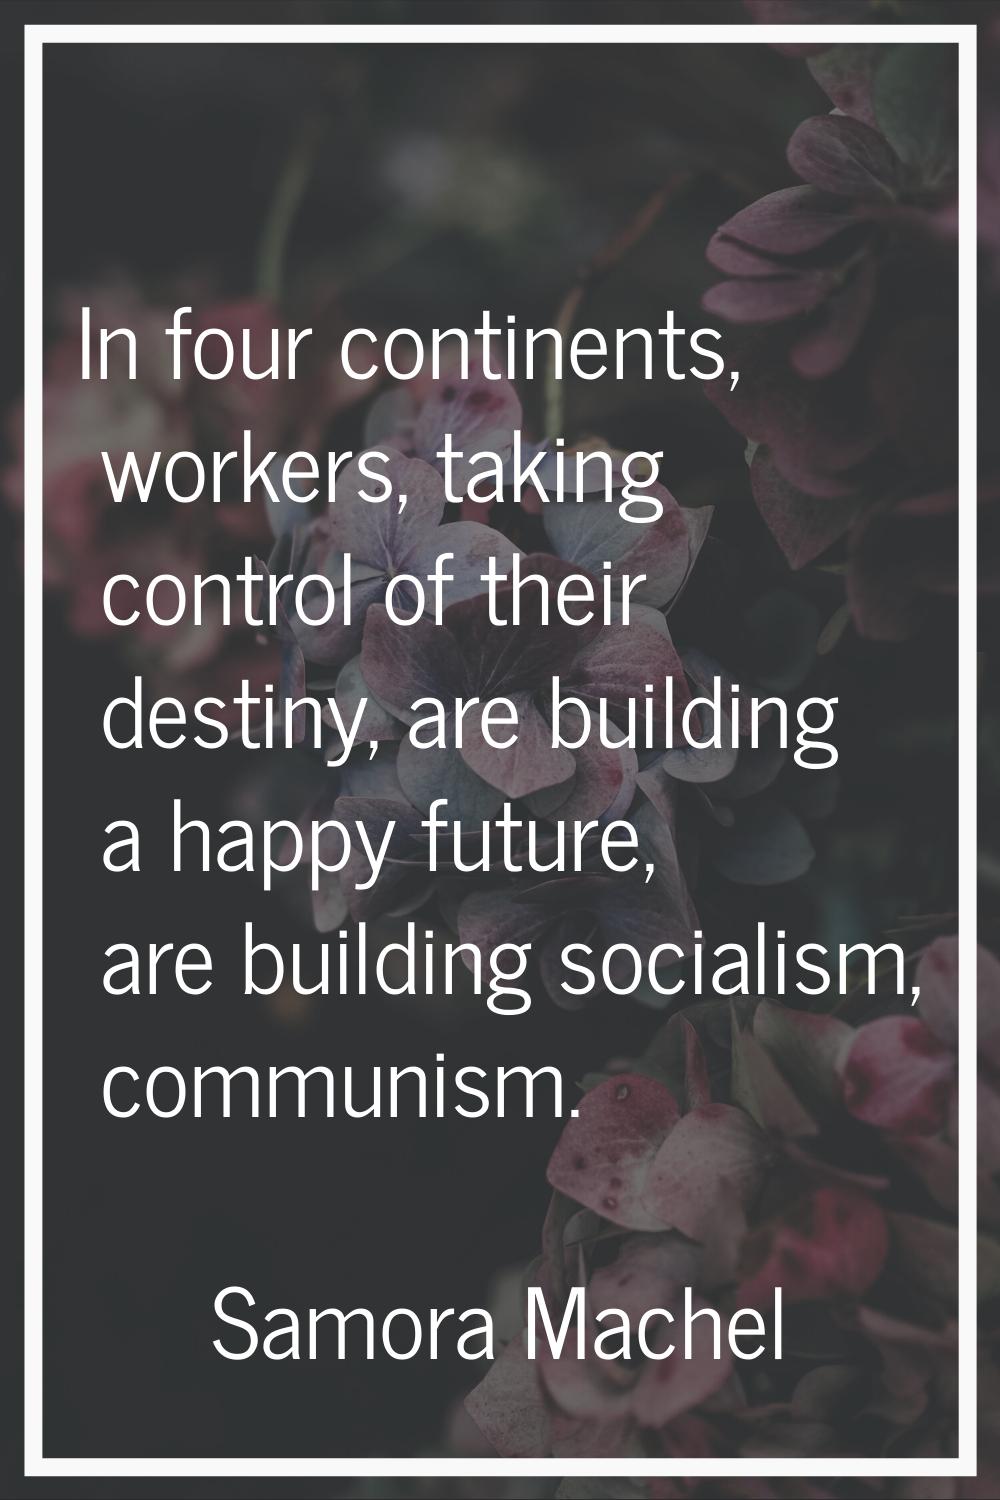 In four continents, workers, taking control of their destiny, are building a happy future, are buil